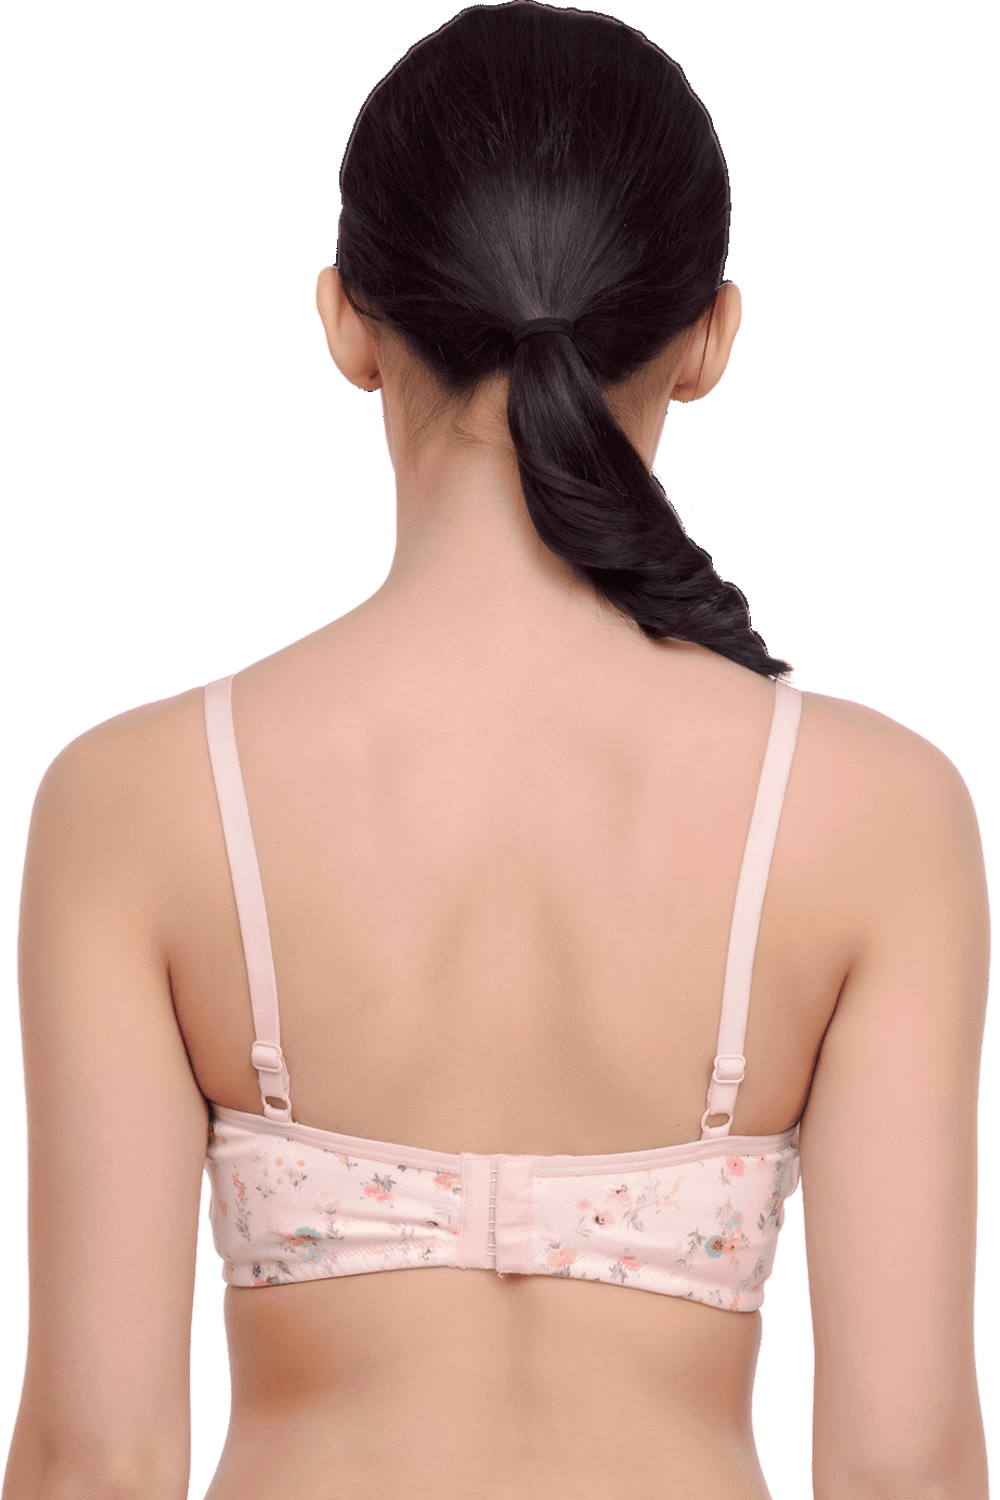 Inner Sense Organic Cotton Padded Underwired Strapless and Backless Bra